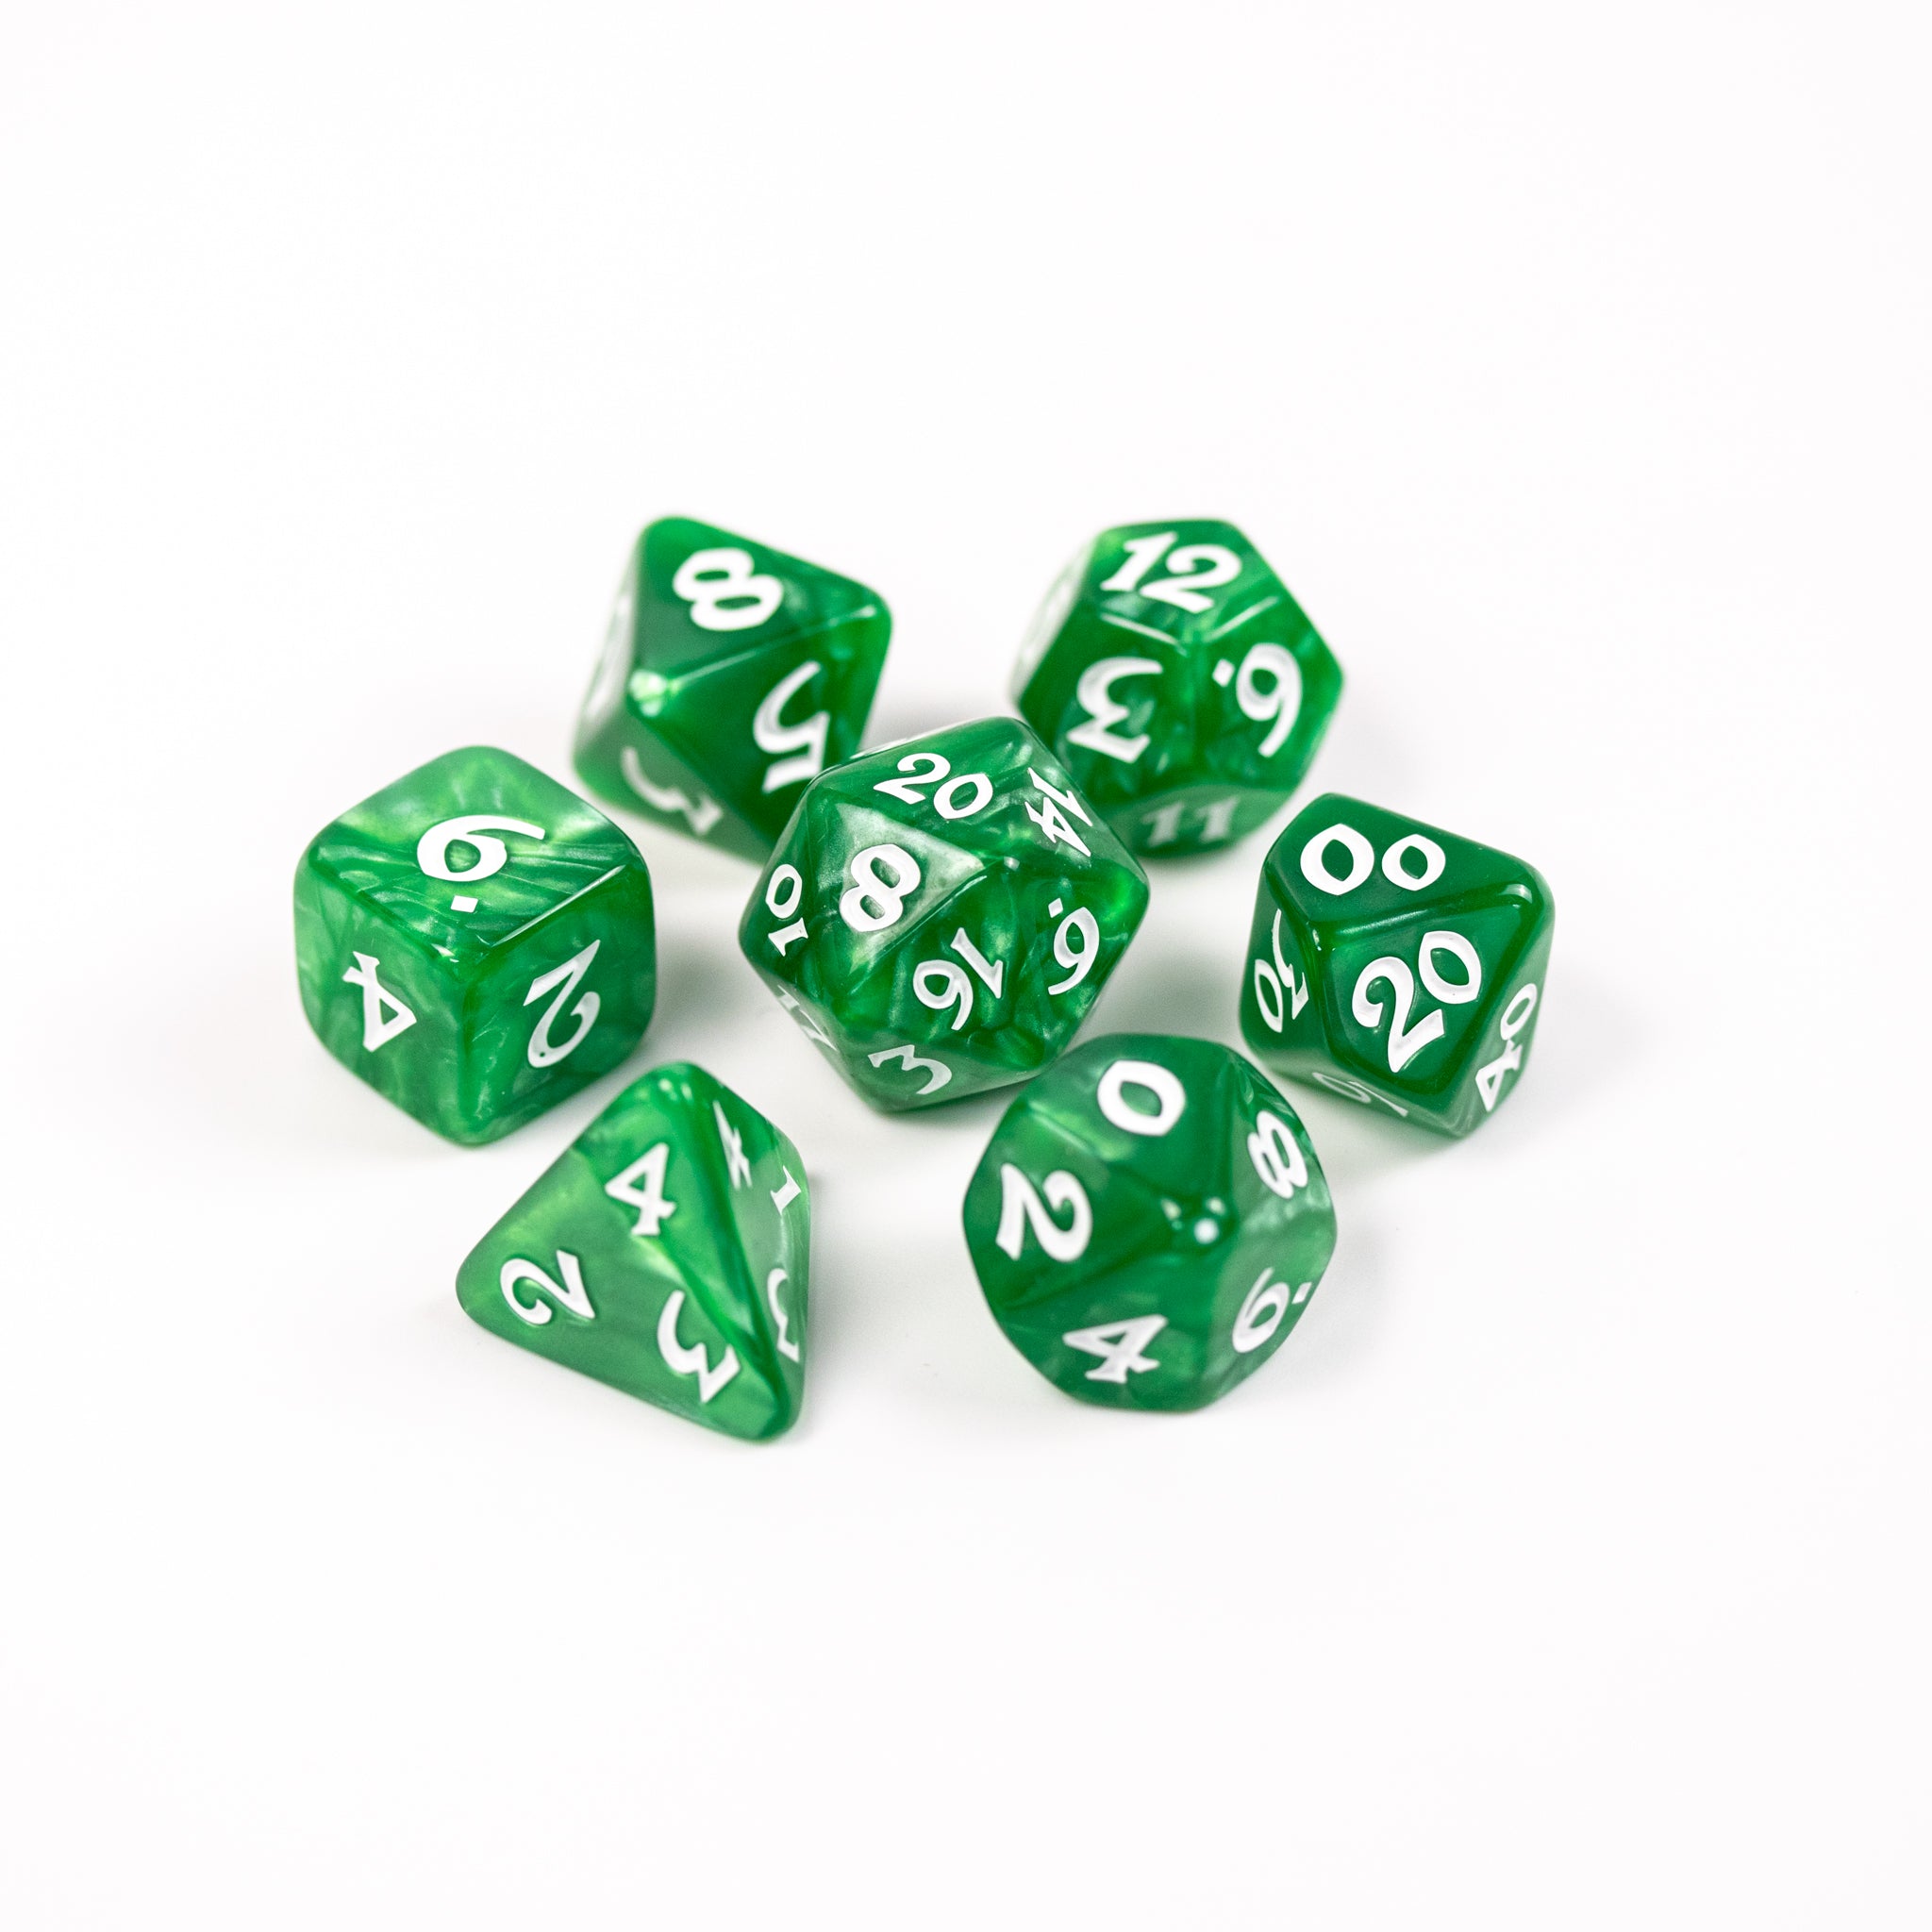 7pc RPG Set - Elessia Essentials - Green with White | D20 Games